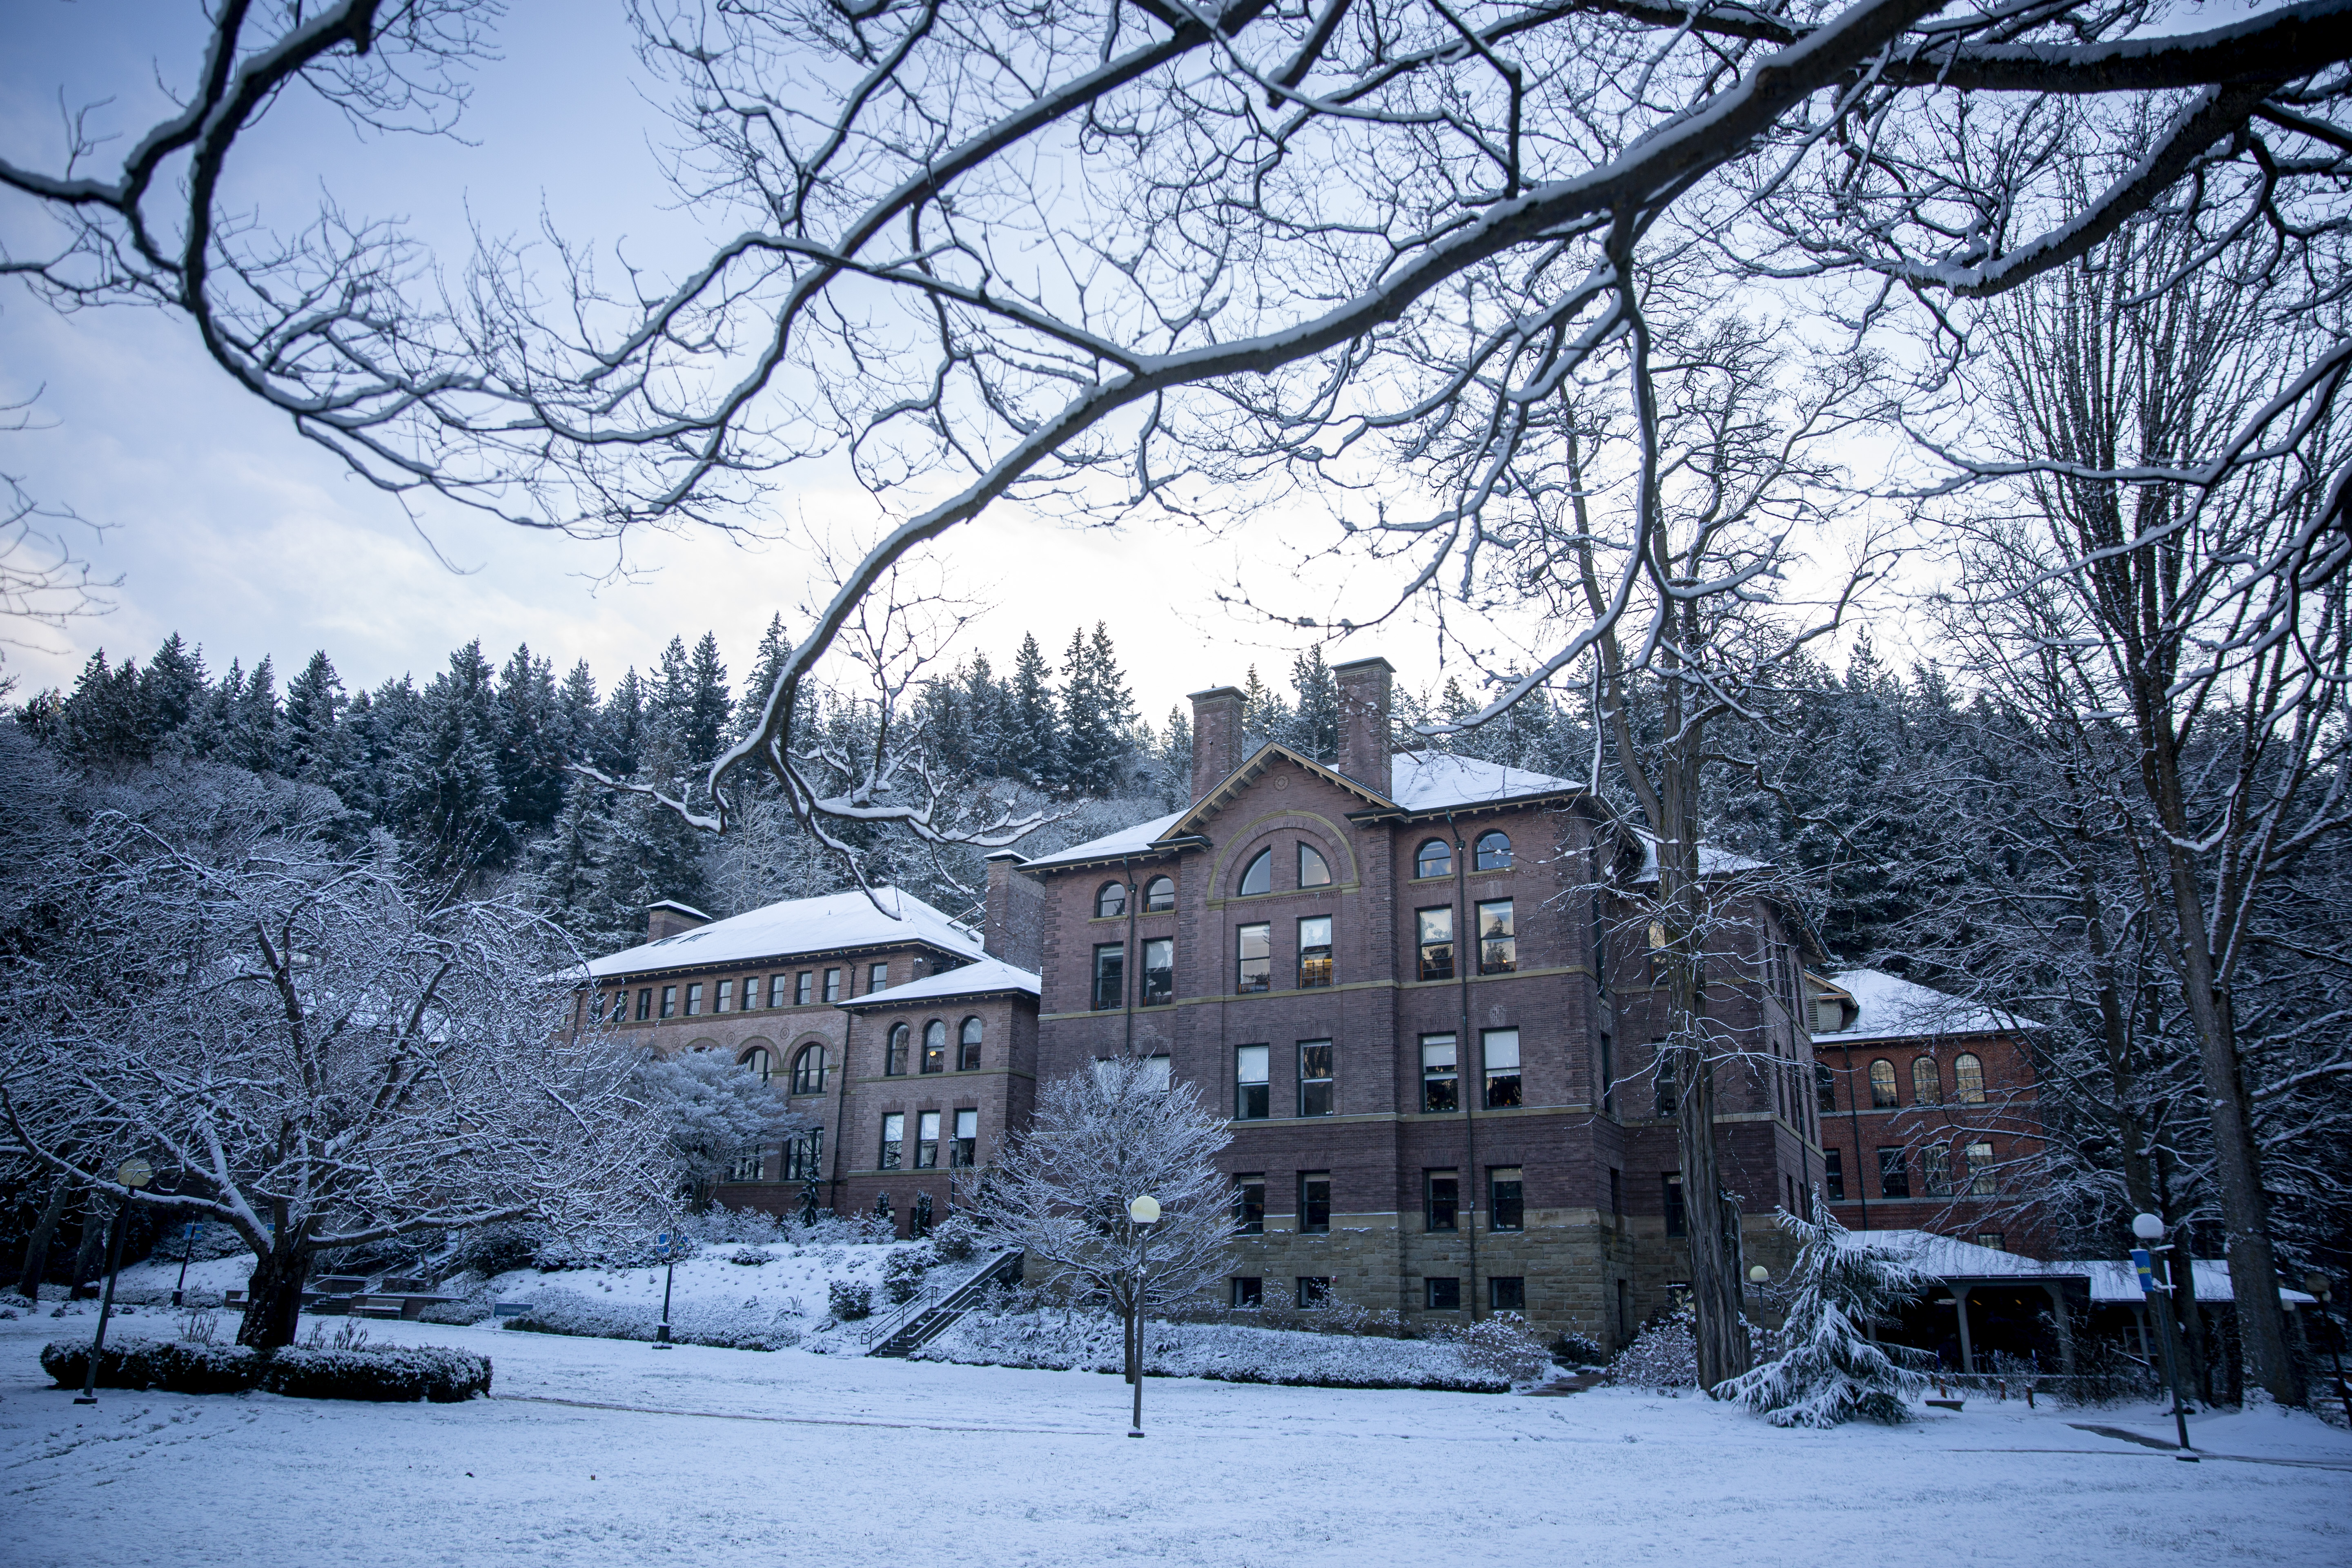 old main with bare trees and snow